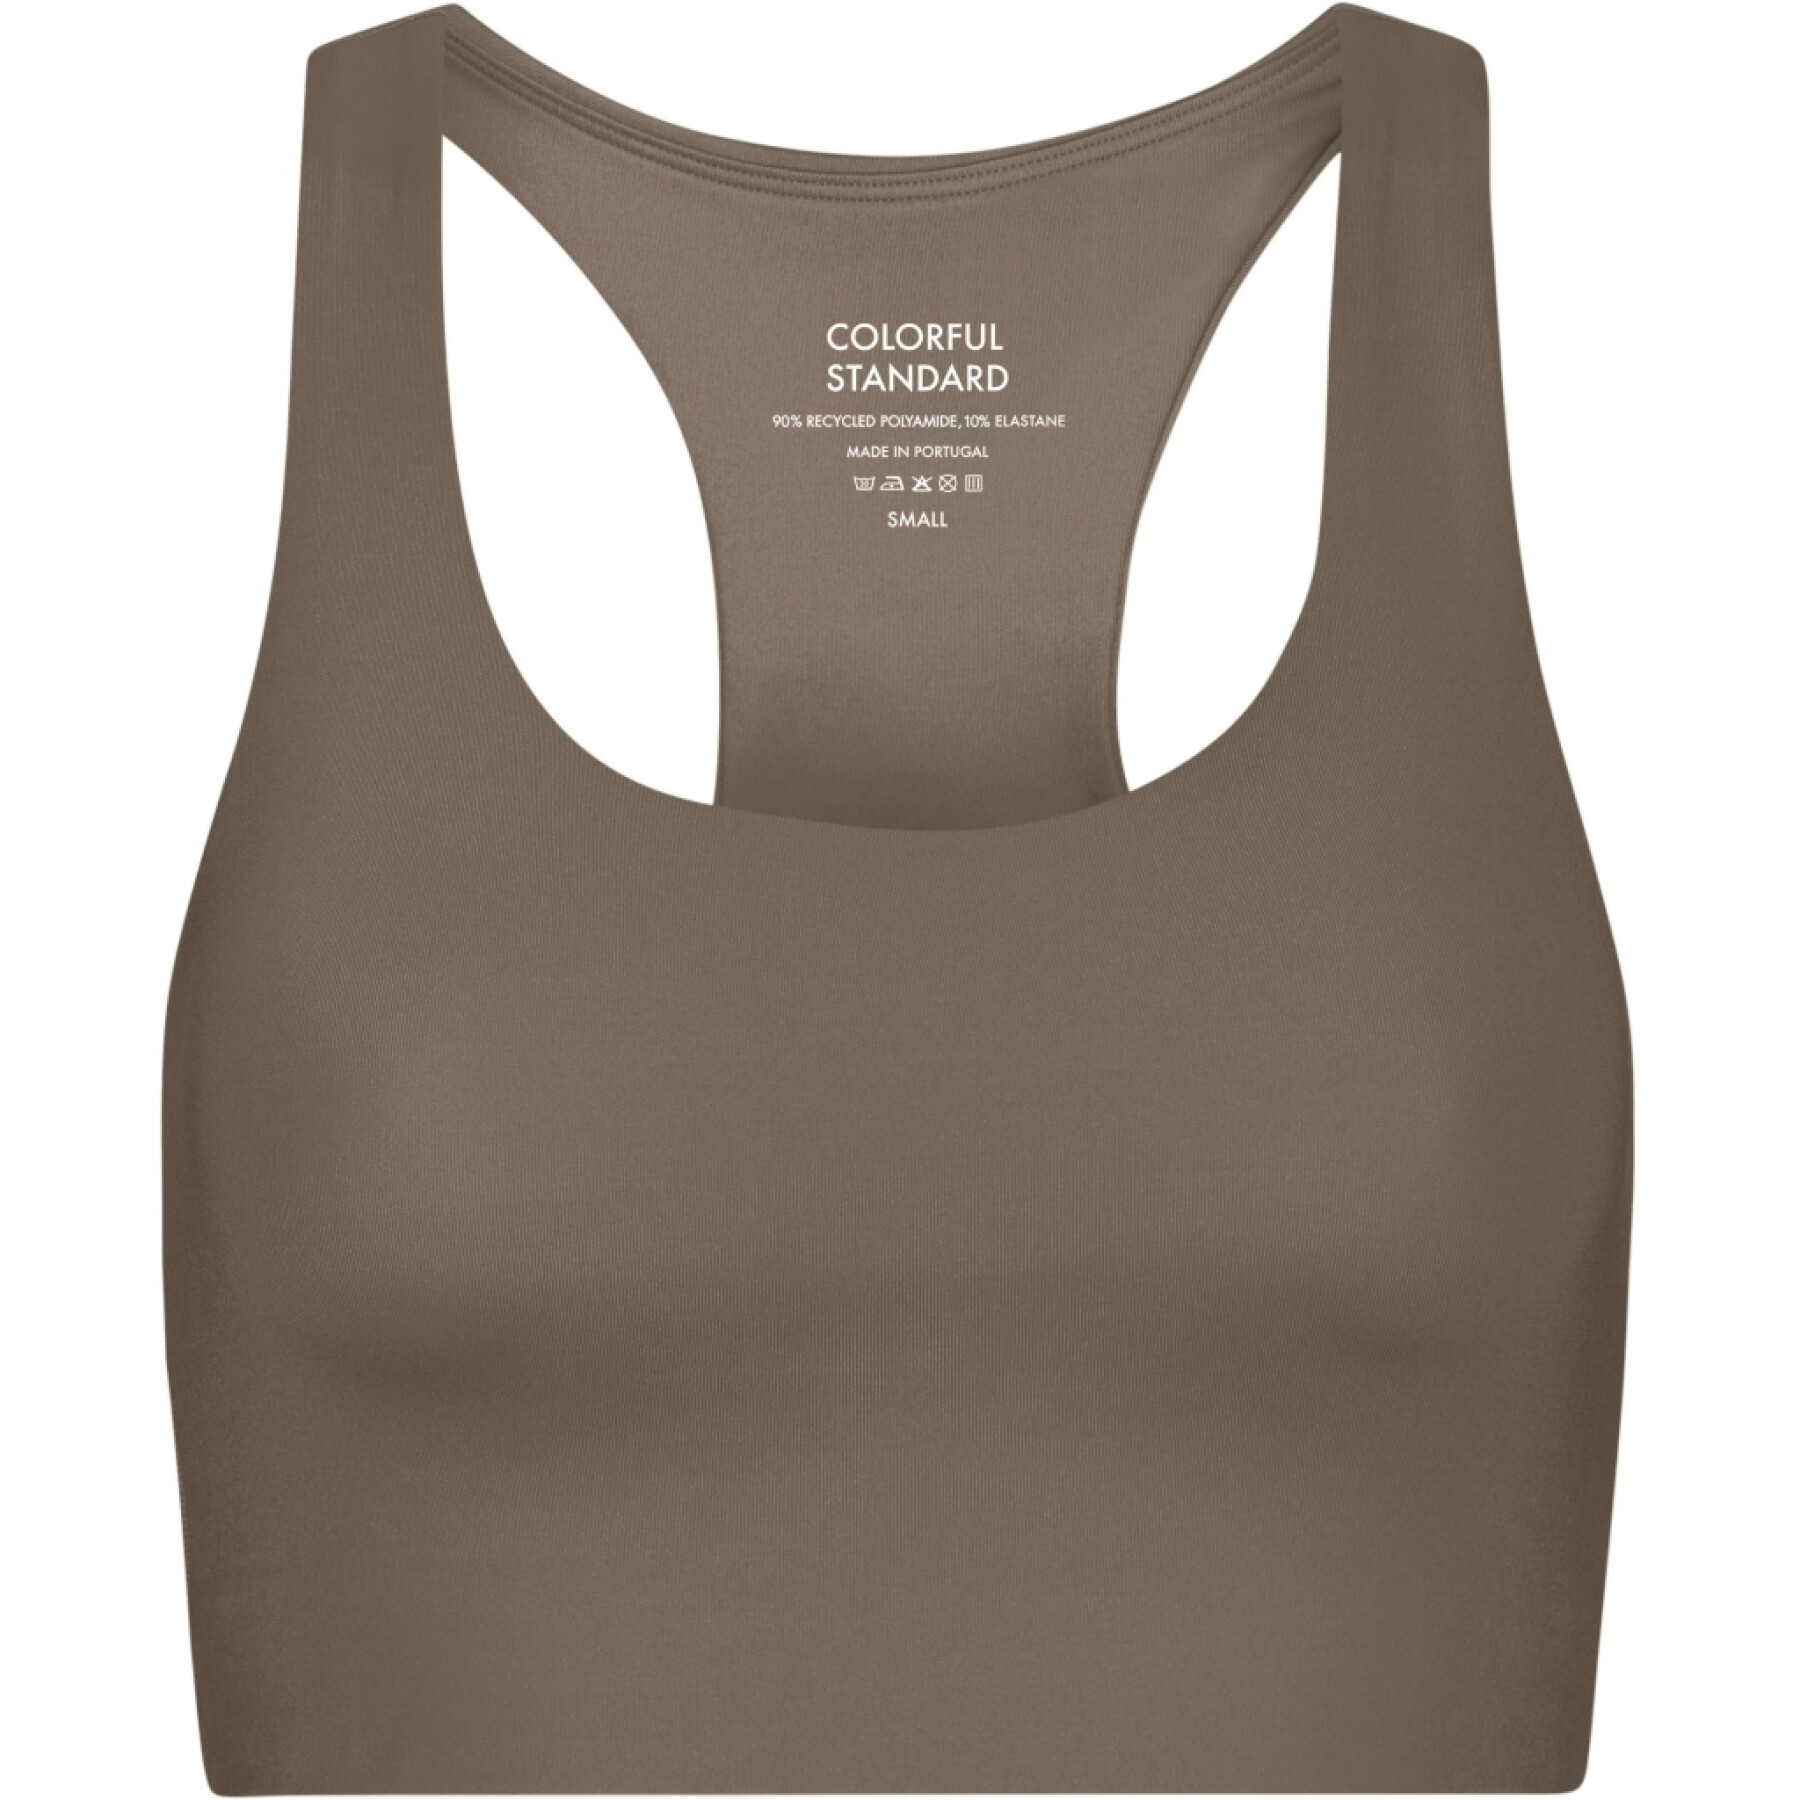 Women's bra Colorful Standard Active Warm Taupe